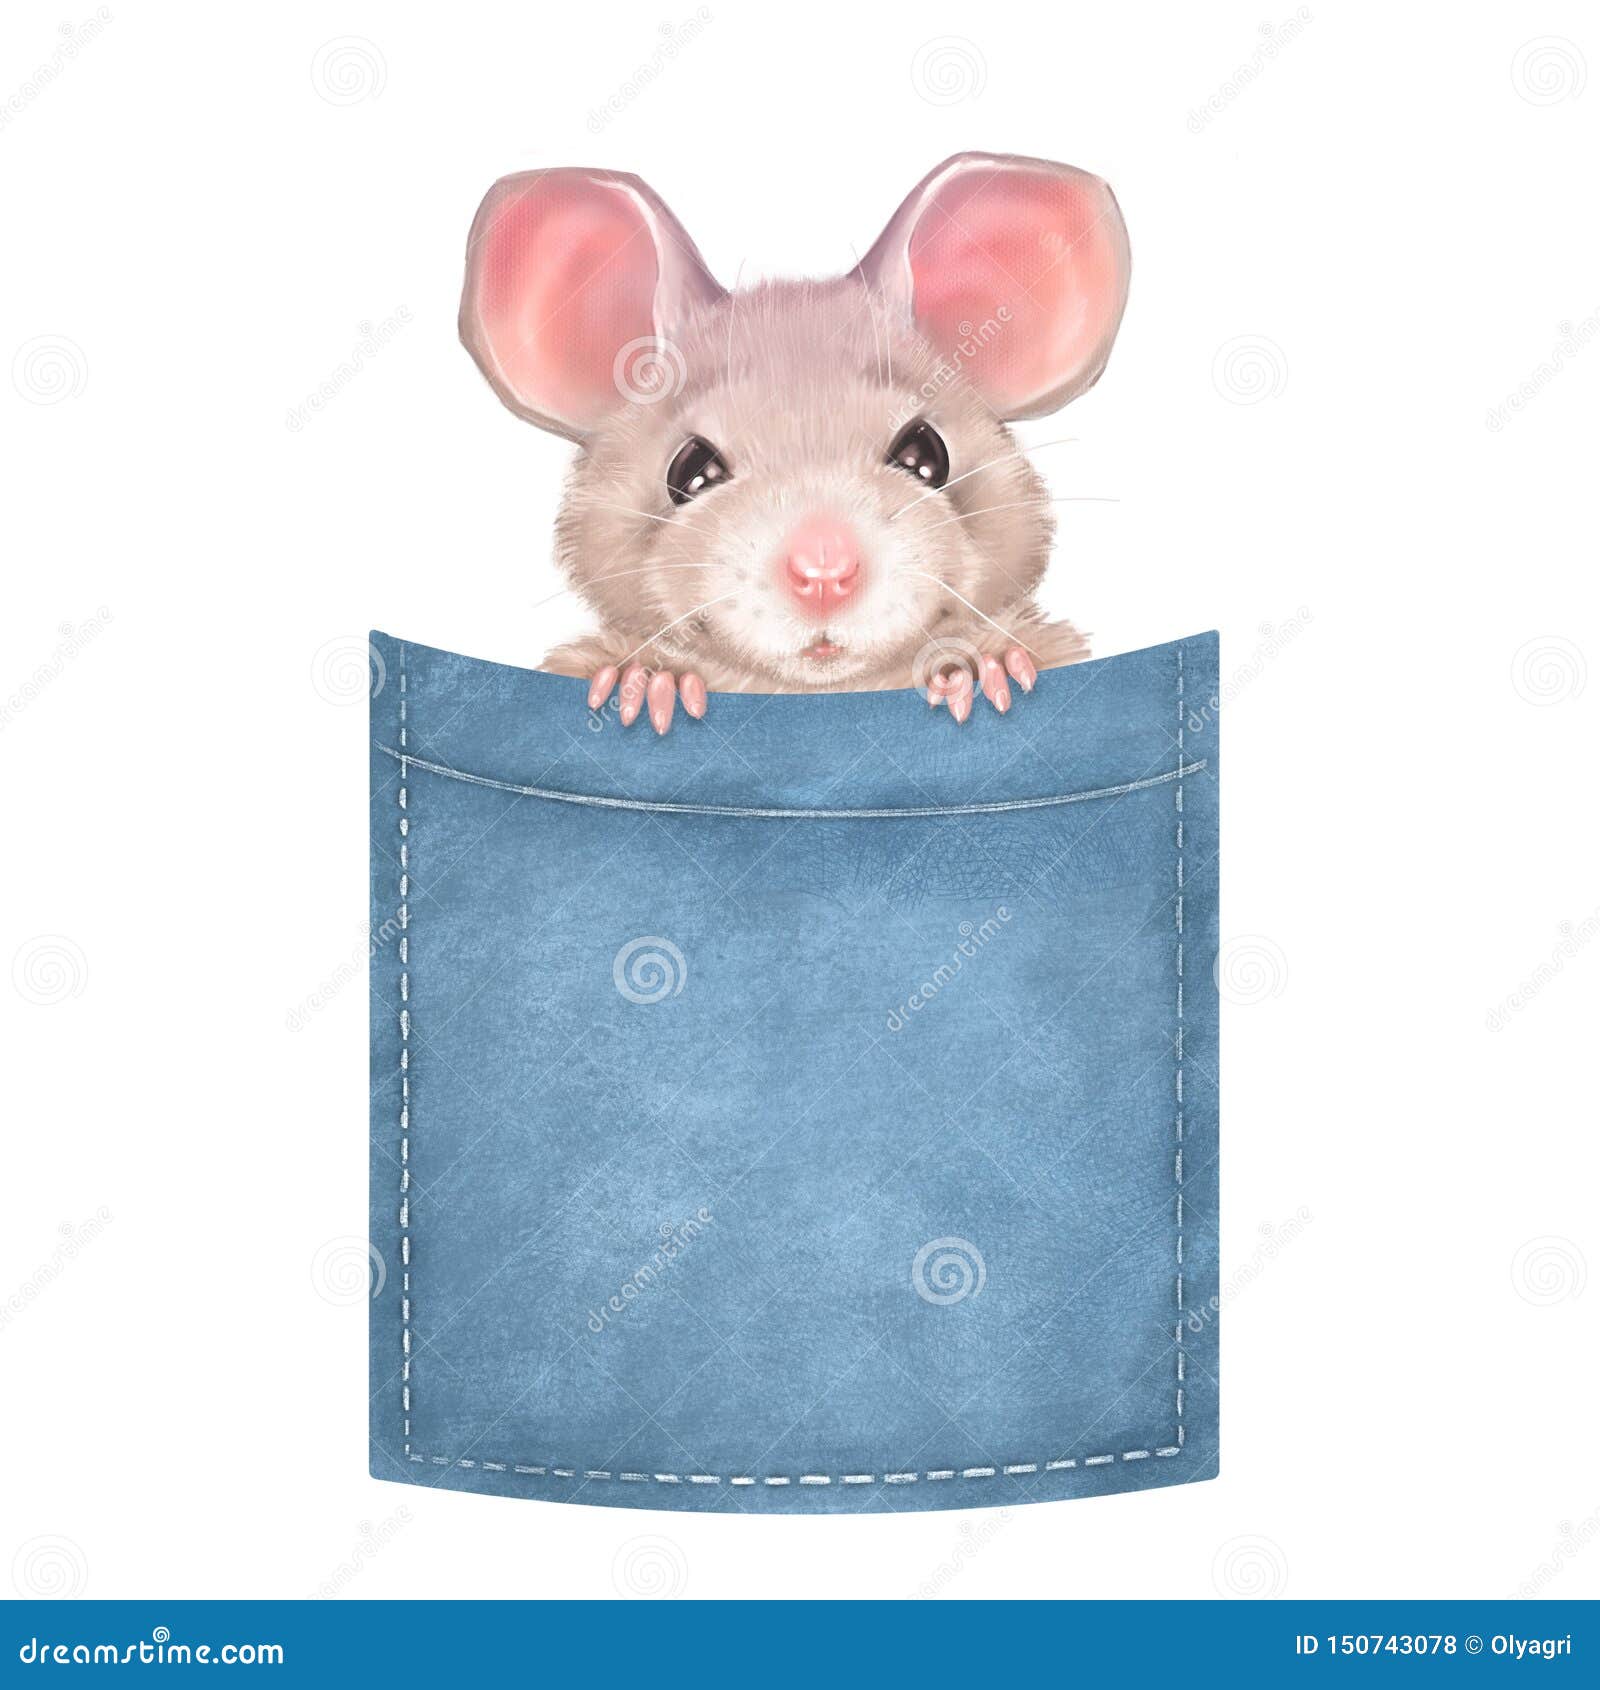 little pocket mouse pictures